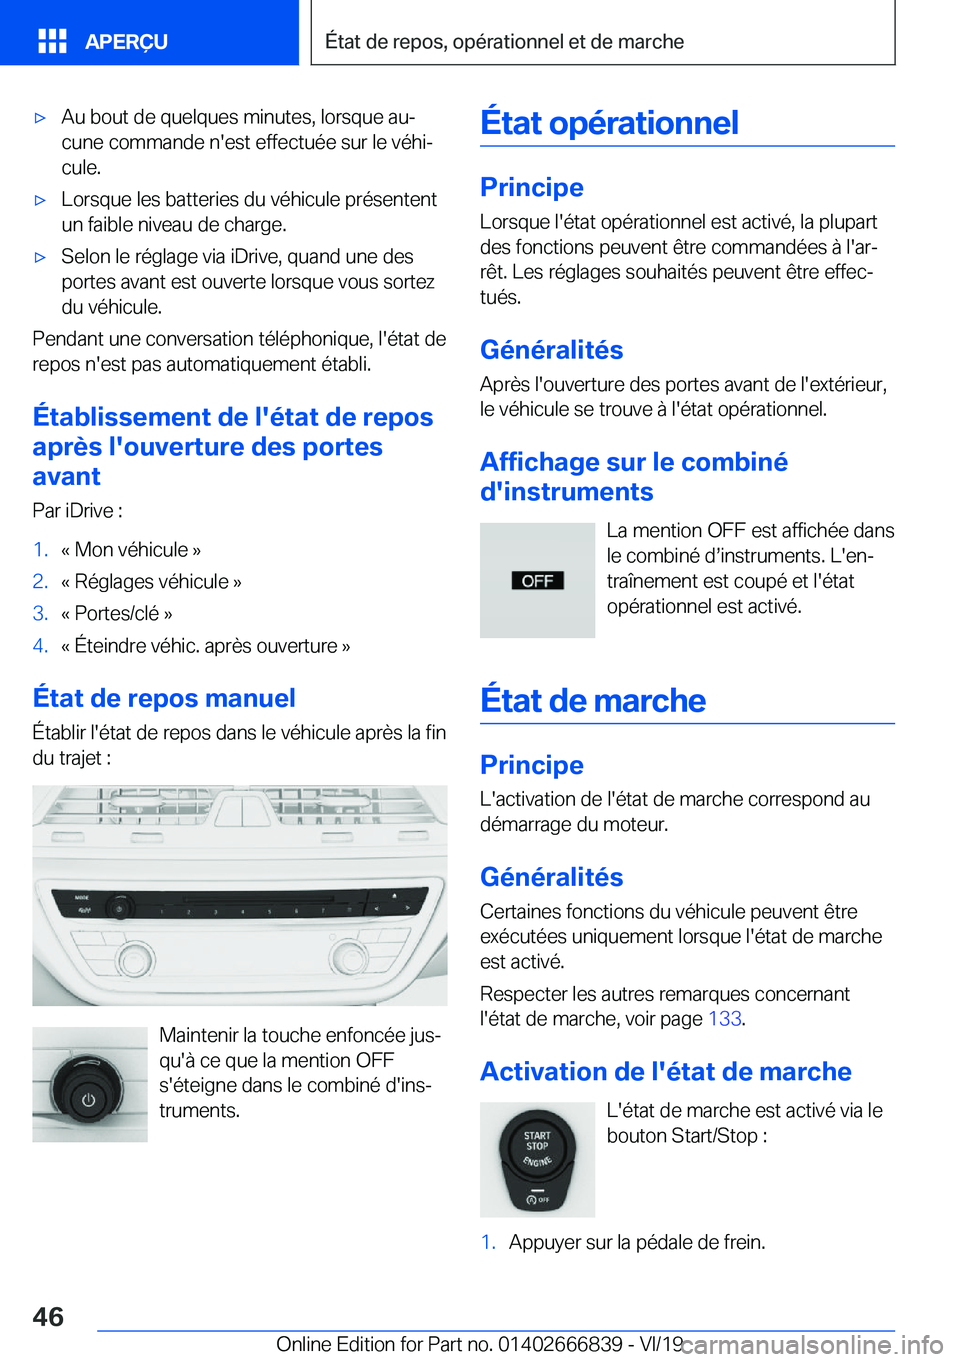 BMW X3 M 2020  Notices Demploi (in French) 'x�A�u��b�o�u�t��d�e��q�u�e�l�q�u�e�s��m�i�n�u�t�e�s�,��l�o�r�s�q�u�e��a�uj�c�u�n�e��c�o�m�m�a�n�d�e��n�'�e�s�t��e�f�f�e�c�t�u�é�e��s�u�r��l�e��v�é�h�ij�c�u�l�e�.'x�L�o�r�s